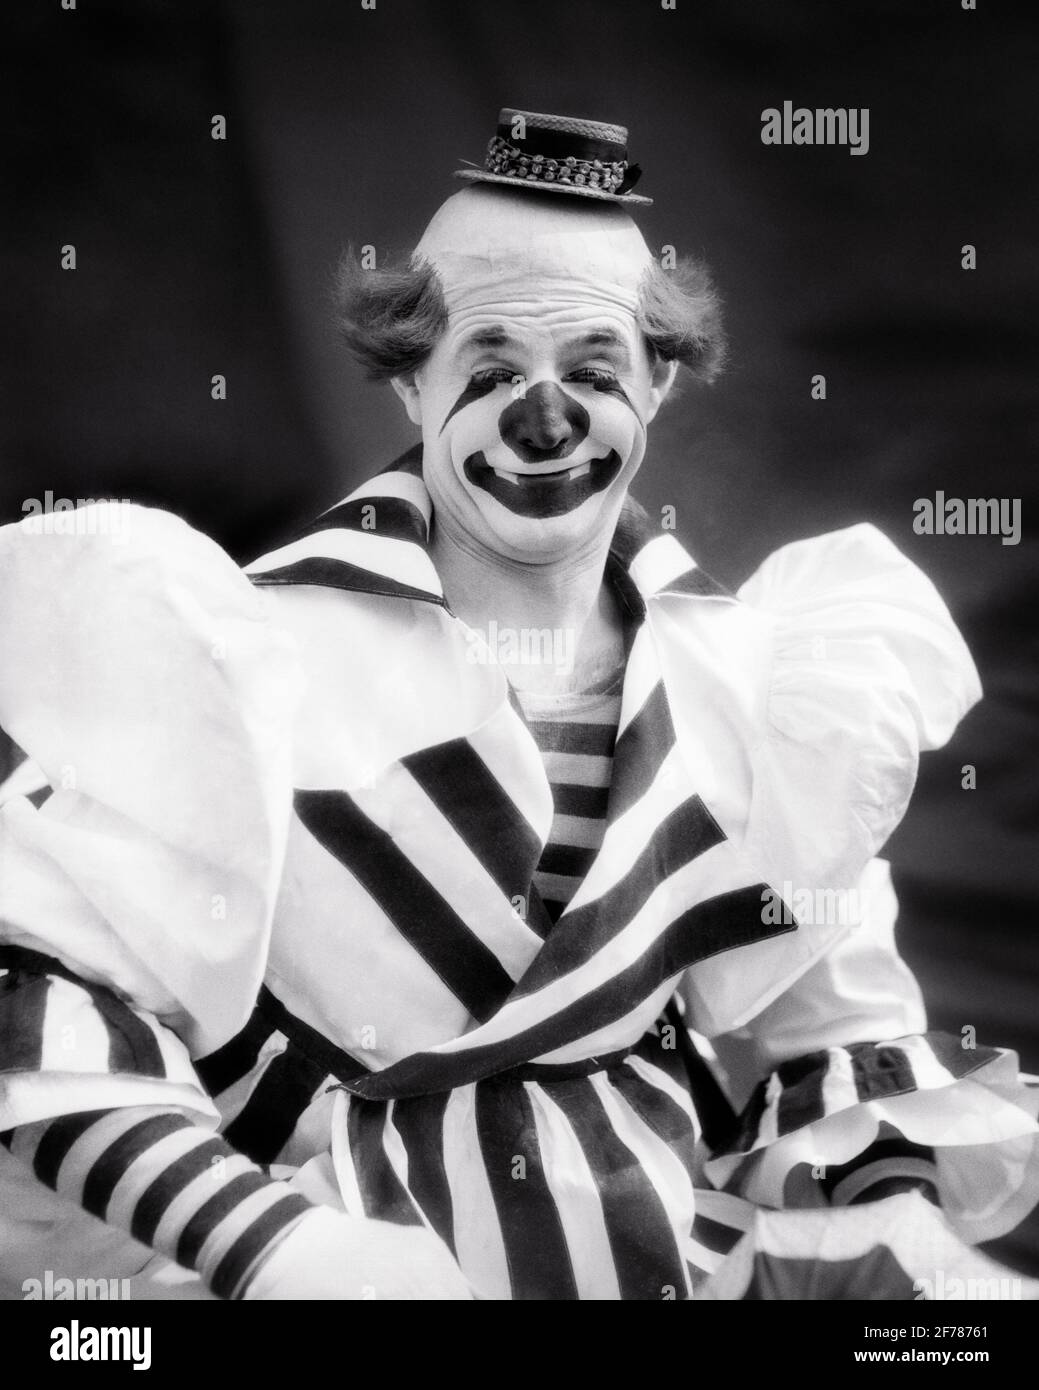 1930s SMILING BIG TOP CIRCUS WHITEFACE CLOWN LOOKING AT CAMERA WEARING TINY HAT STRIPED OVERSIZE COSTUME - c2681 HAR001 HARS COPY SPACE HALF-LENGTH MAKEUP PERSONS INSPIRATION TRADITIONAL CHARACTER MALES ENTERTAINMENT SPIRITUALITY CONFIDENCE B&W SADNESS CLOWNS EYE CONTACT HUMOROUS HAPPINESS WELLNESS CHEERFUL PERFORMER STRENGTH EXCITEMENT OVERSIZE TRADITION MAKE UP COMICAL PRIDE ENTERTAINER OCCUPATIONS SMILES WHITEFACE COMEDY ESTABLISHED JESTER JOYFUL STYLISH TINY MID-ADULT MID-ADULT MAN BIG TOP BLACK AND WHITE FOOL HAR001 OLD FASHIONED Stock Photo